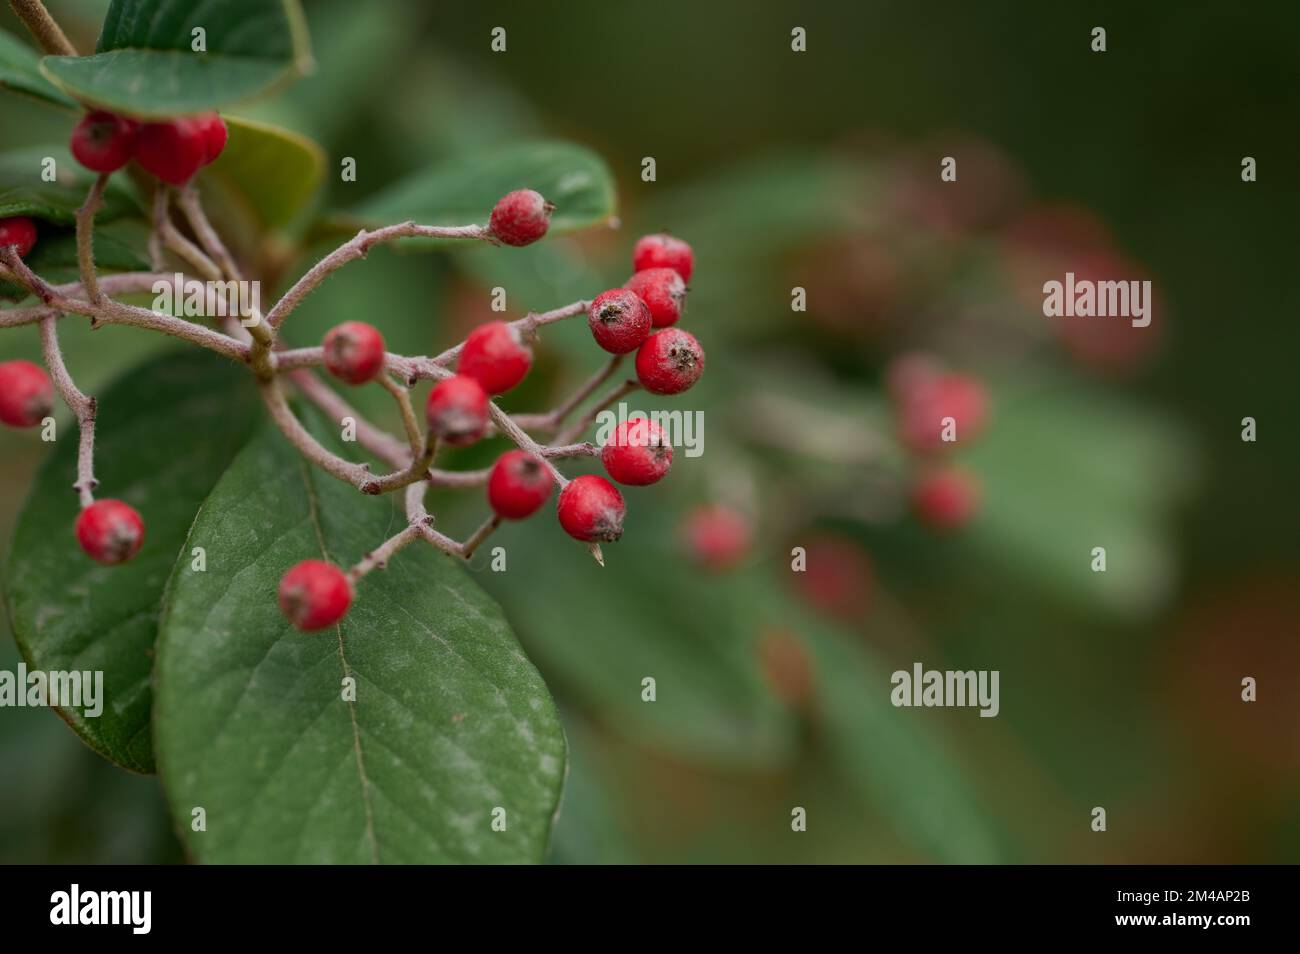 Closeup of small red berries on branches of late cotoneaster tree with green leaves growing in forest Stock Photo